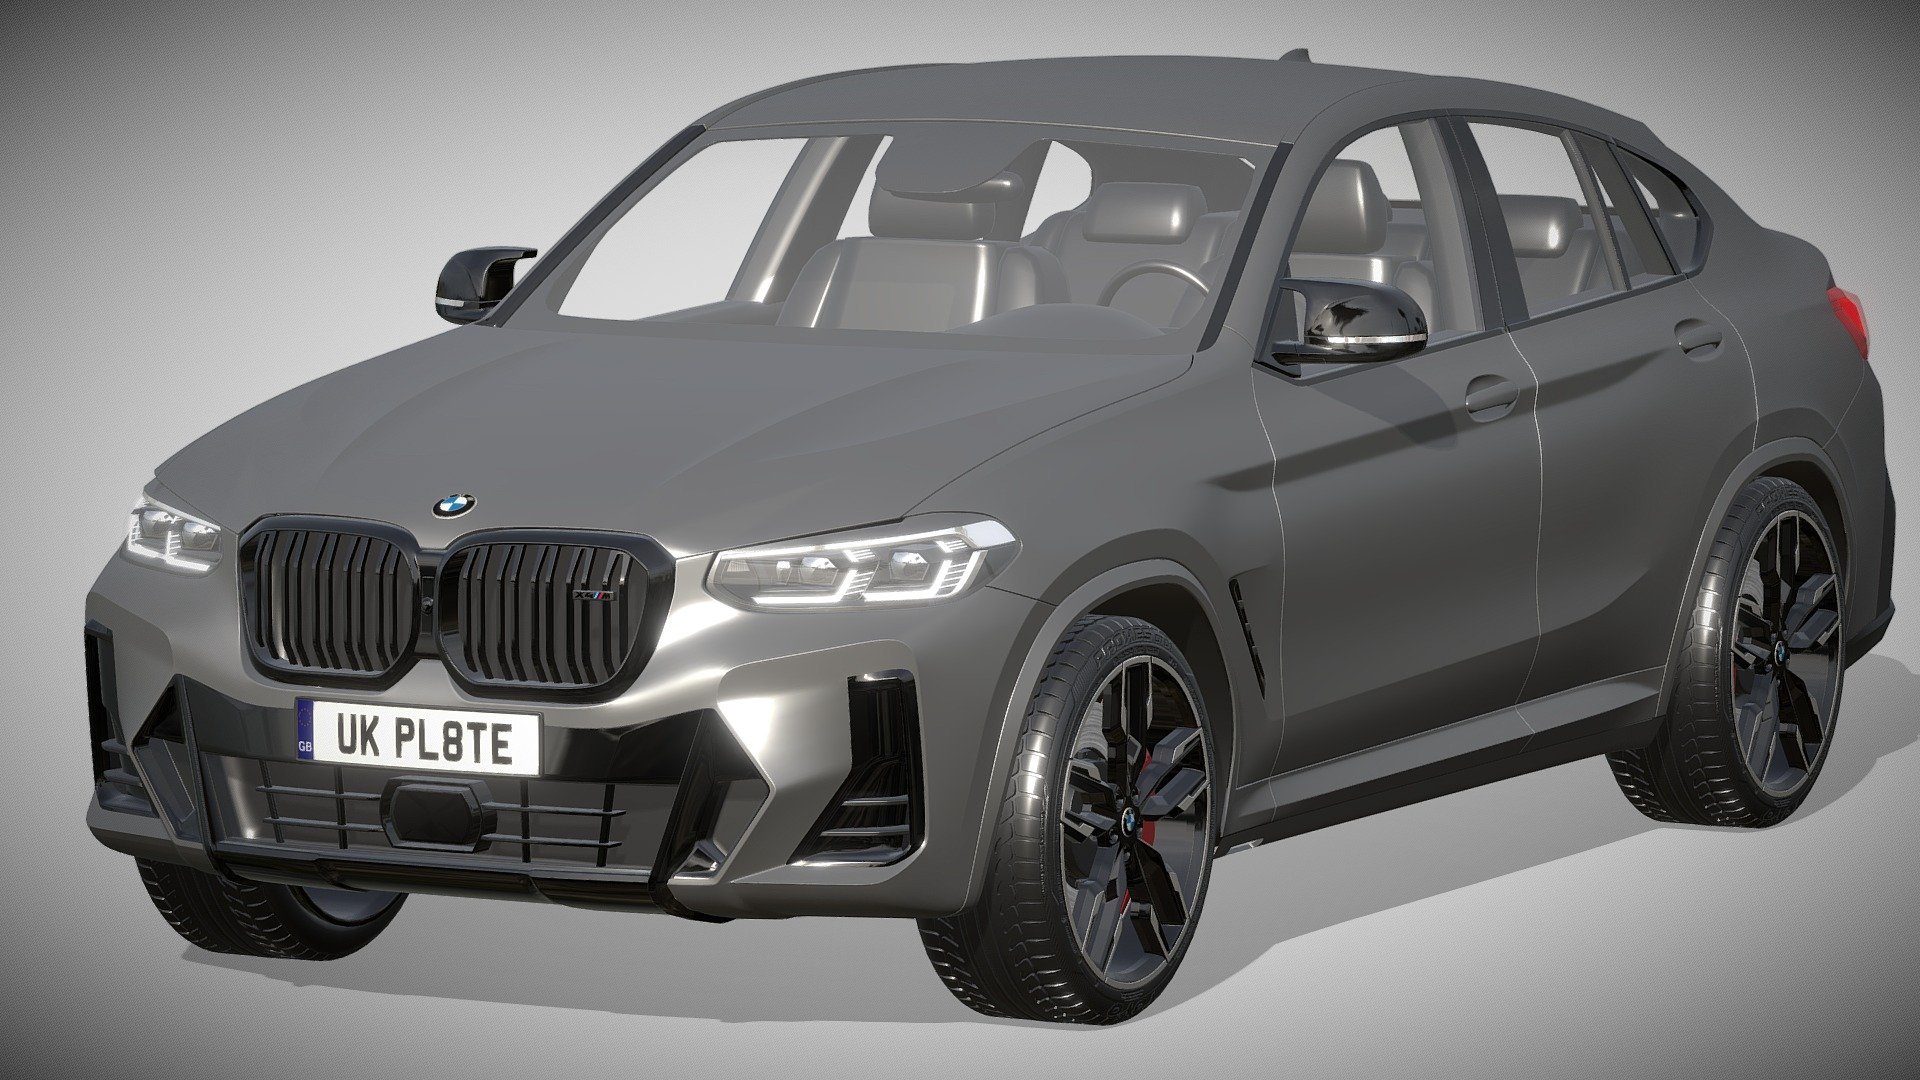 BMW X4 M40i 2022

https://www.bmw.de/de/neufahrzeuge/x/x4/2021/bmw-X4-ueberblick.html

Clean geometry Light weight model, yet completely detailed for HI-Res renders. Use for movies, Advertisements or games

Corona render and materials

All textures include in *.rar files

Lighting setup is not included in the file! - BMW X4 M40i 2022 - Buy Royalty Free 3D model by zifir3d 3d model